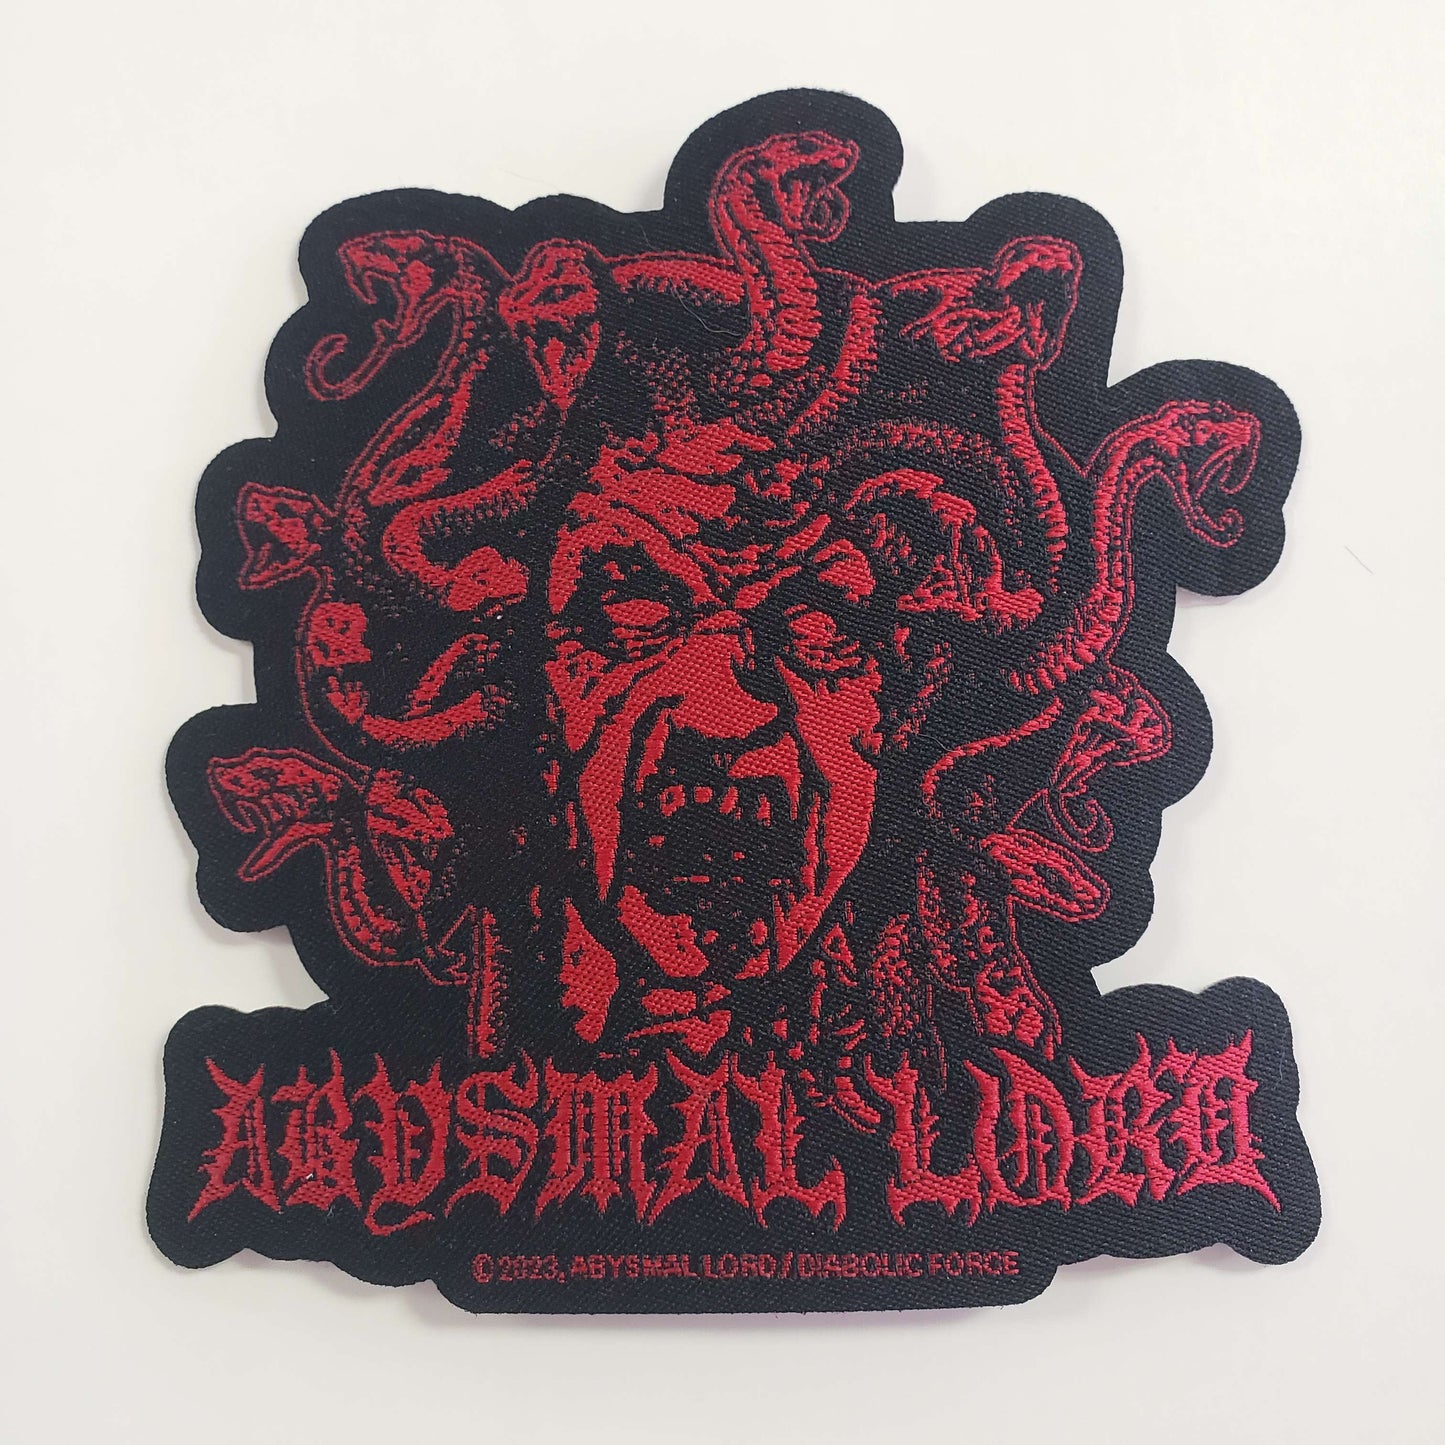 Abysmal Lord - Bestiary of Immortal Hunger woven patch